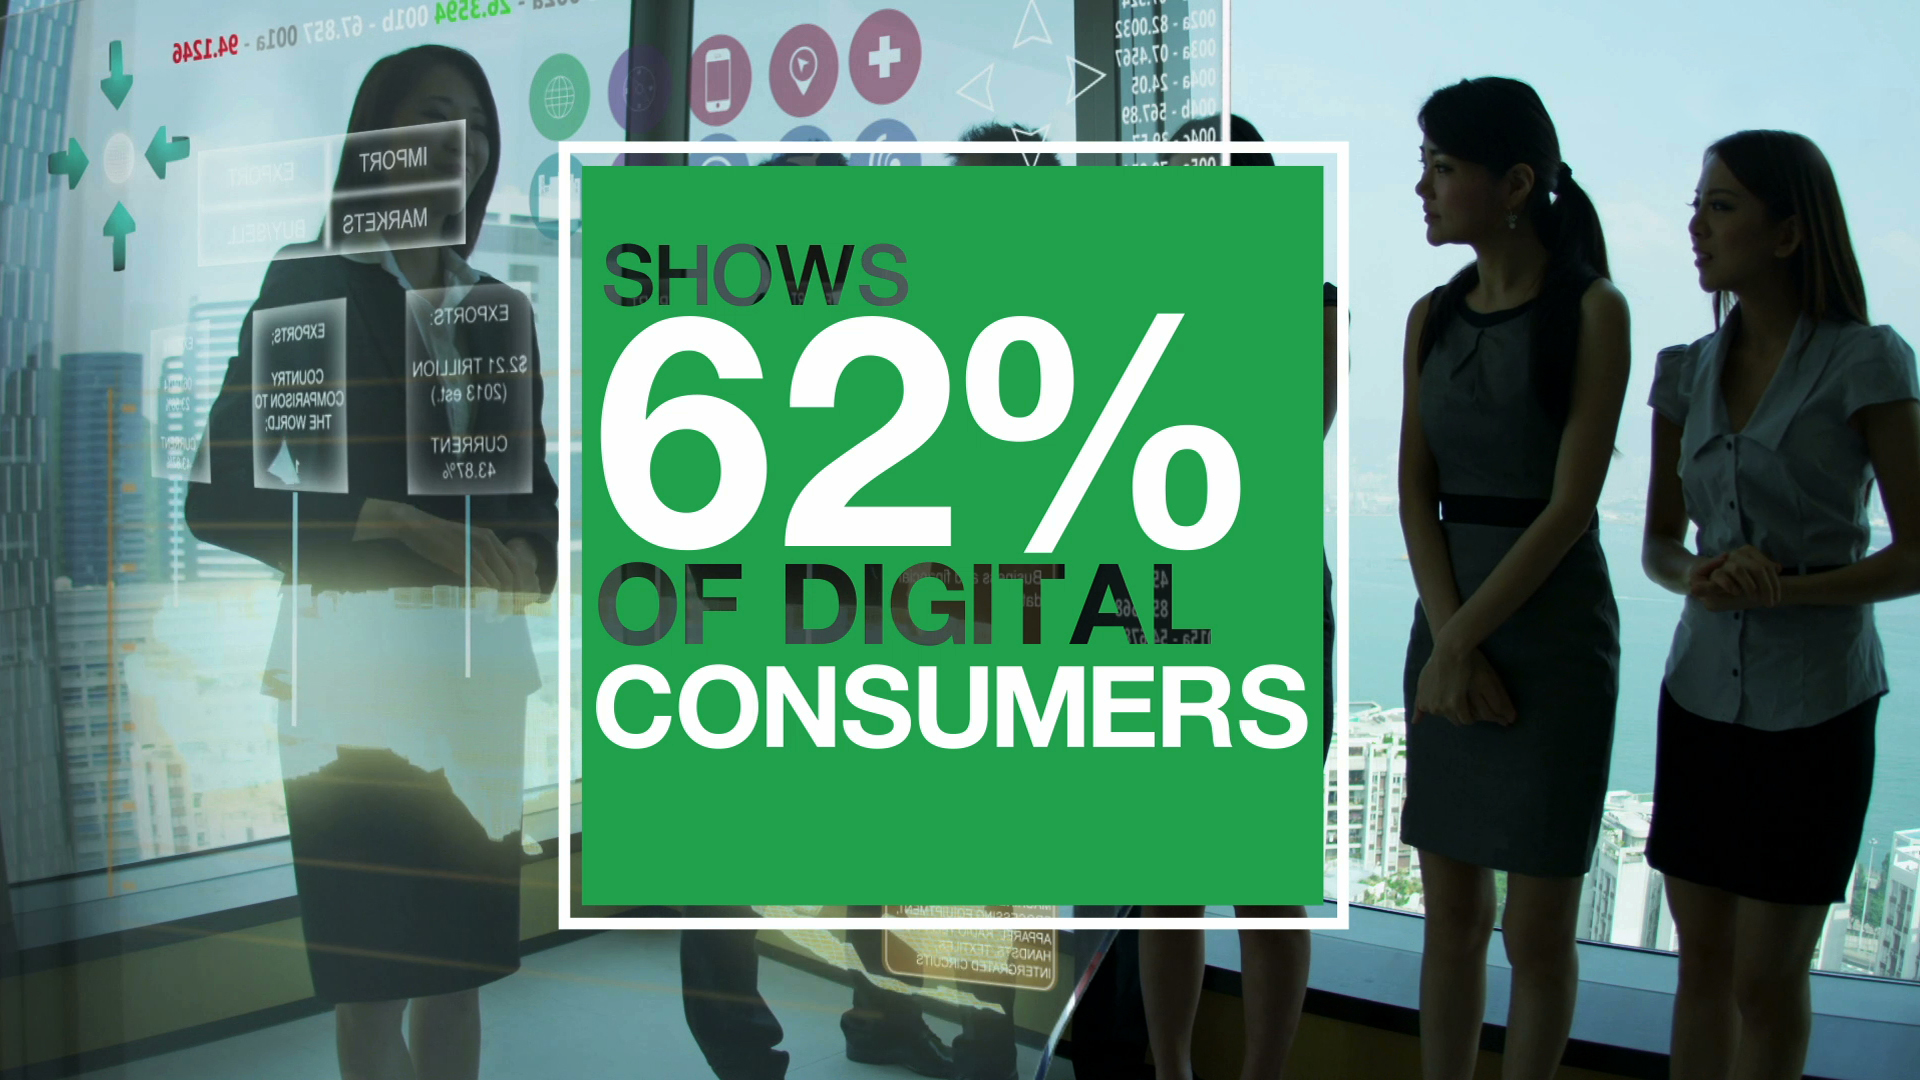 Graphic showing digital consumer stats